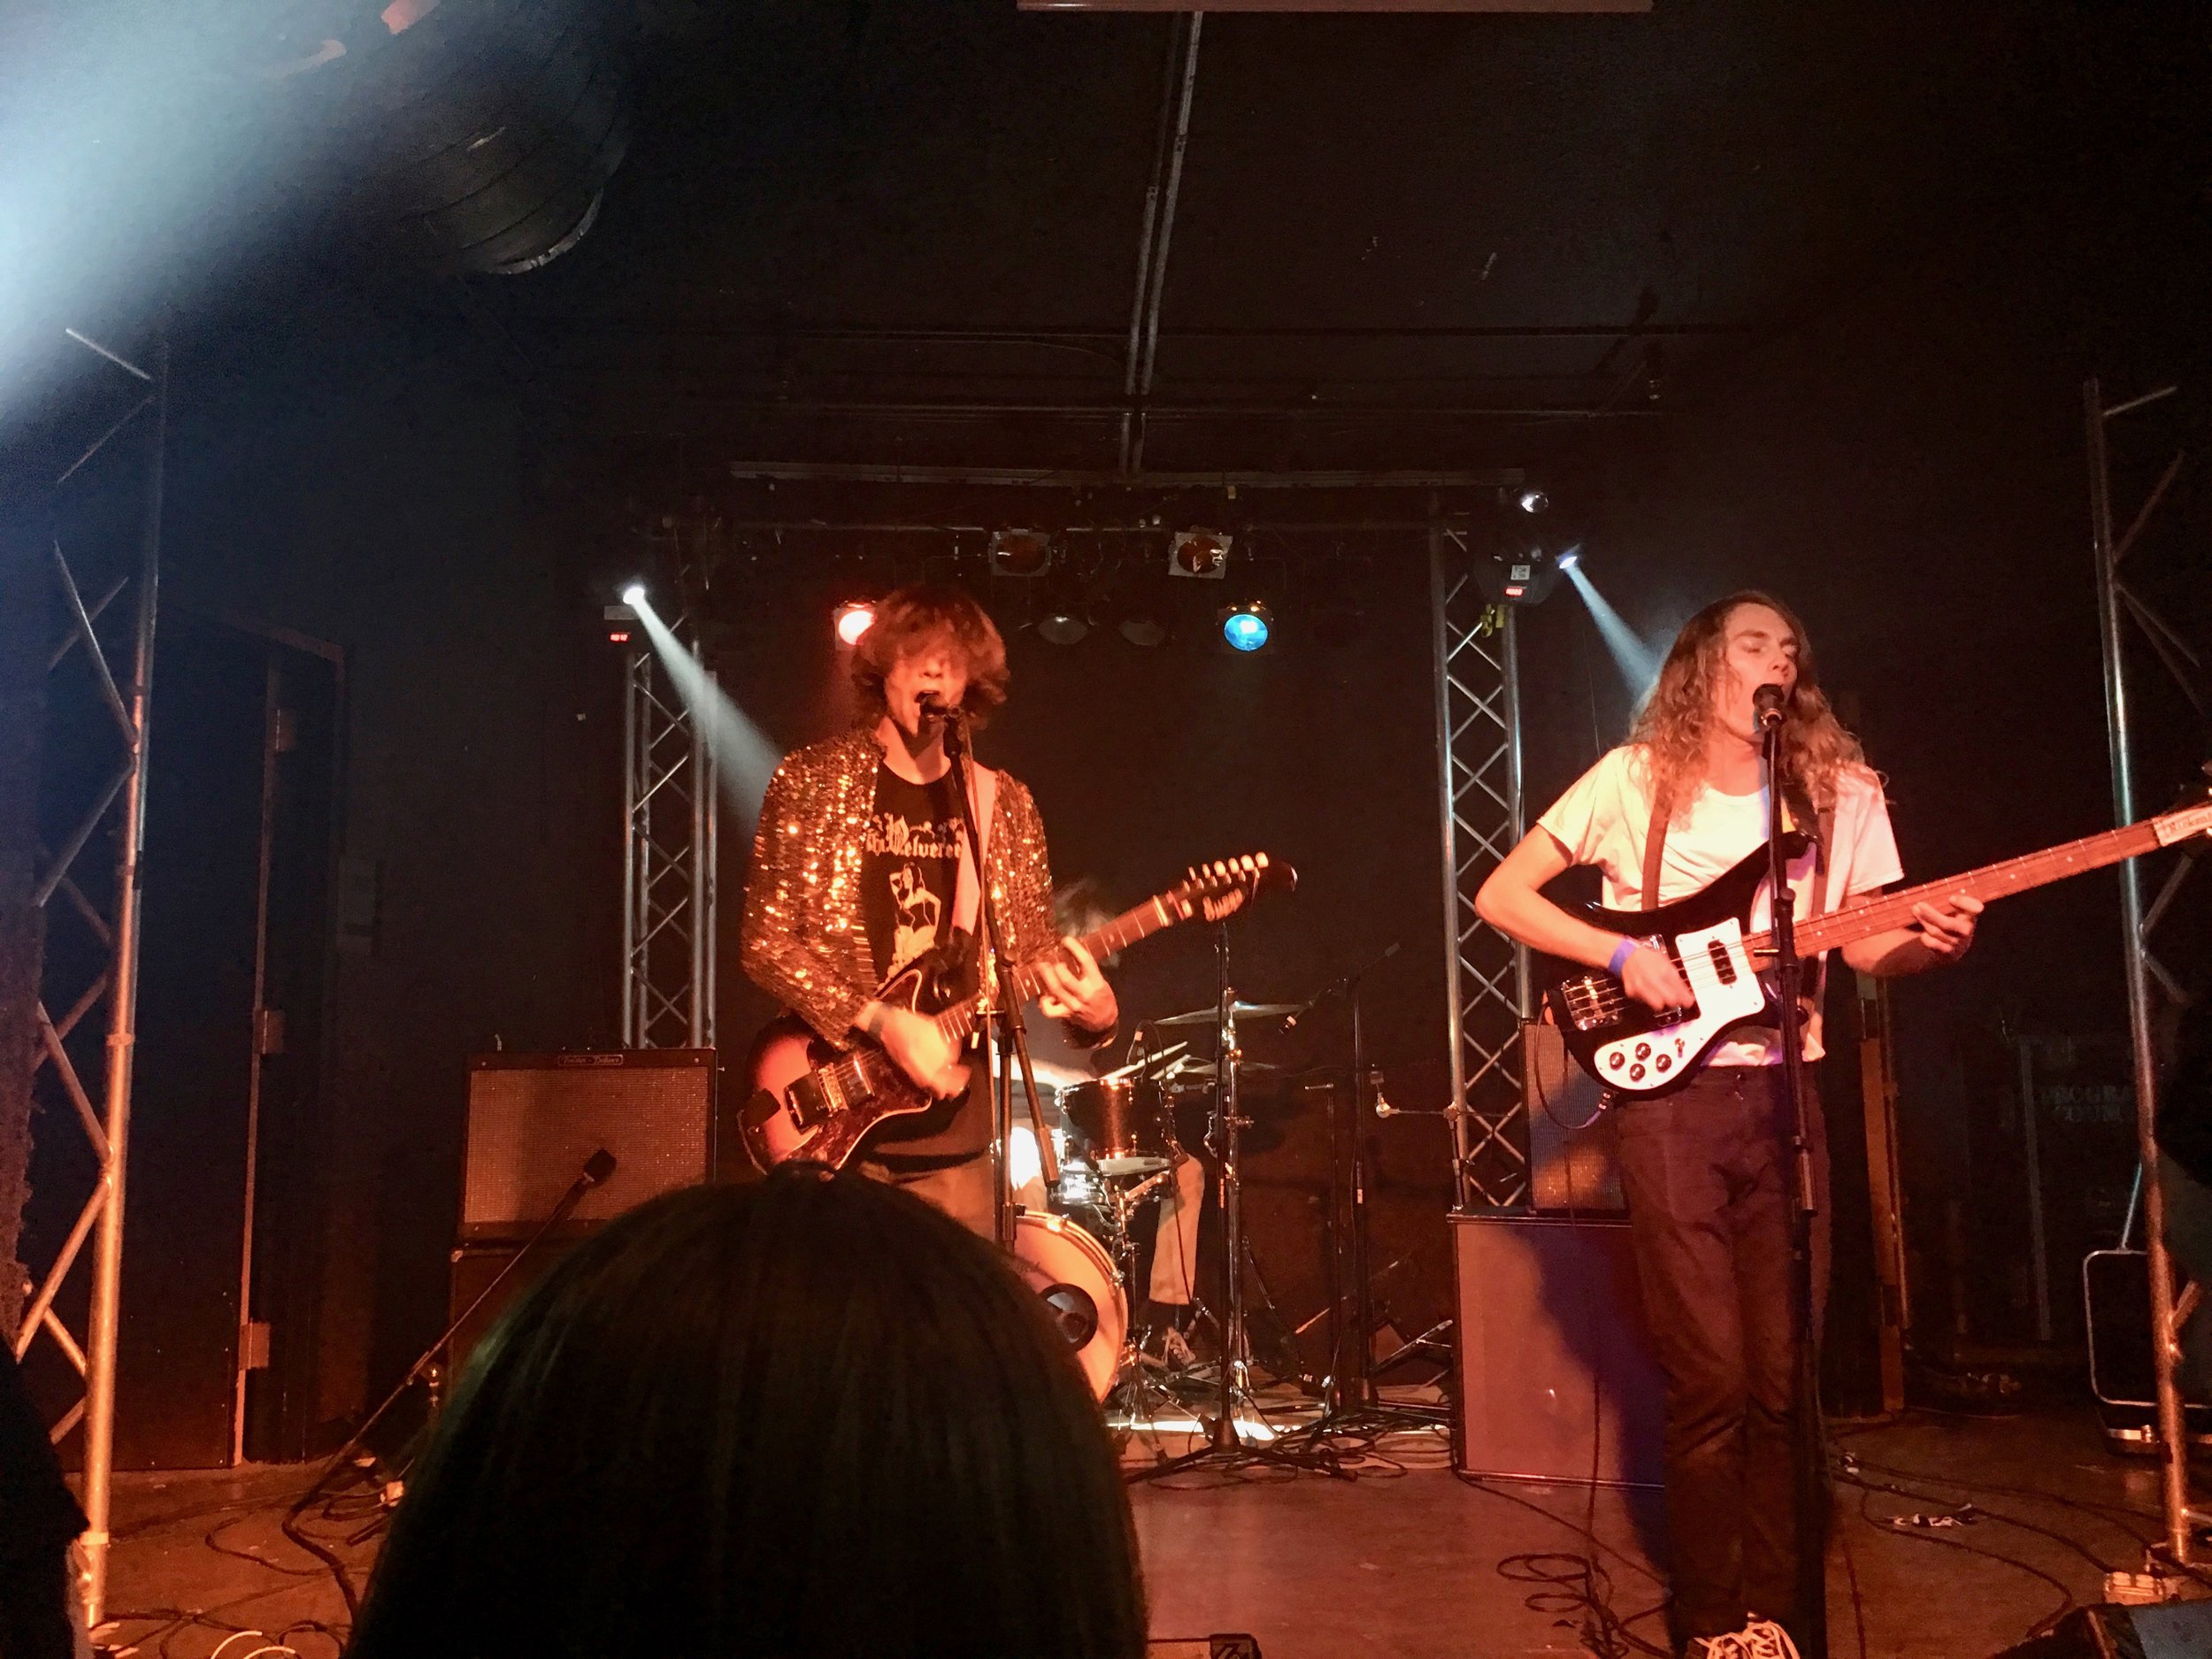 Concert Review: The Beeves @ Club 156